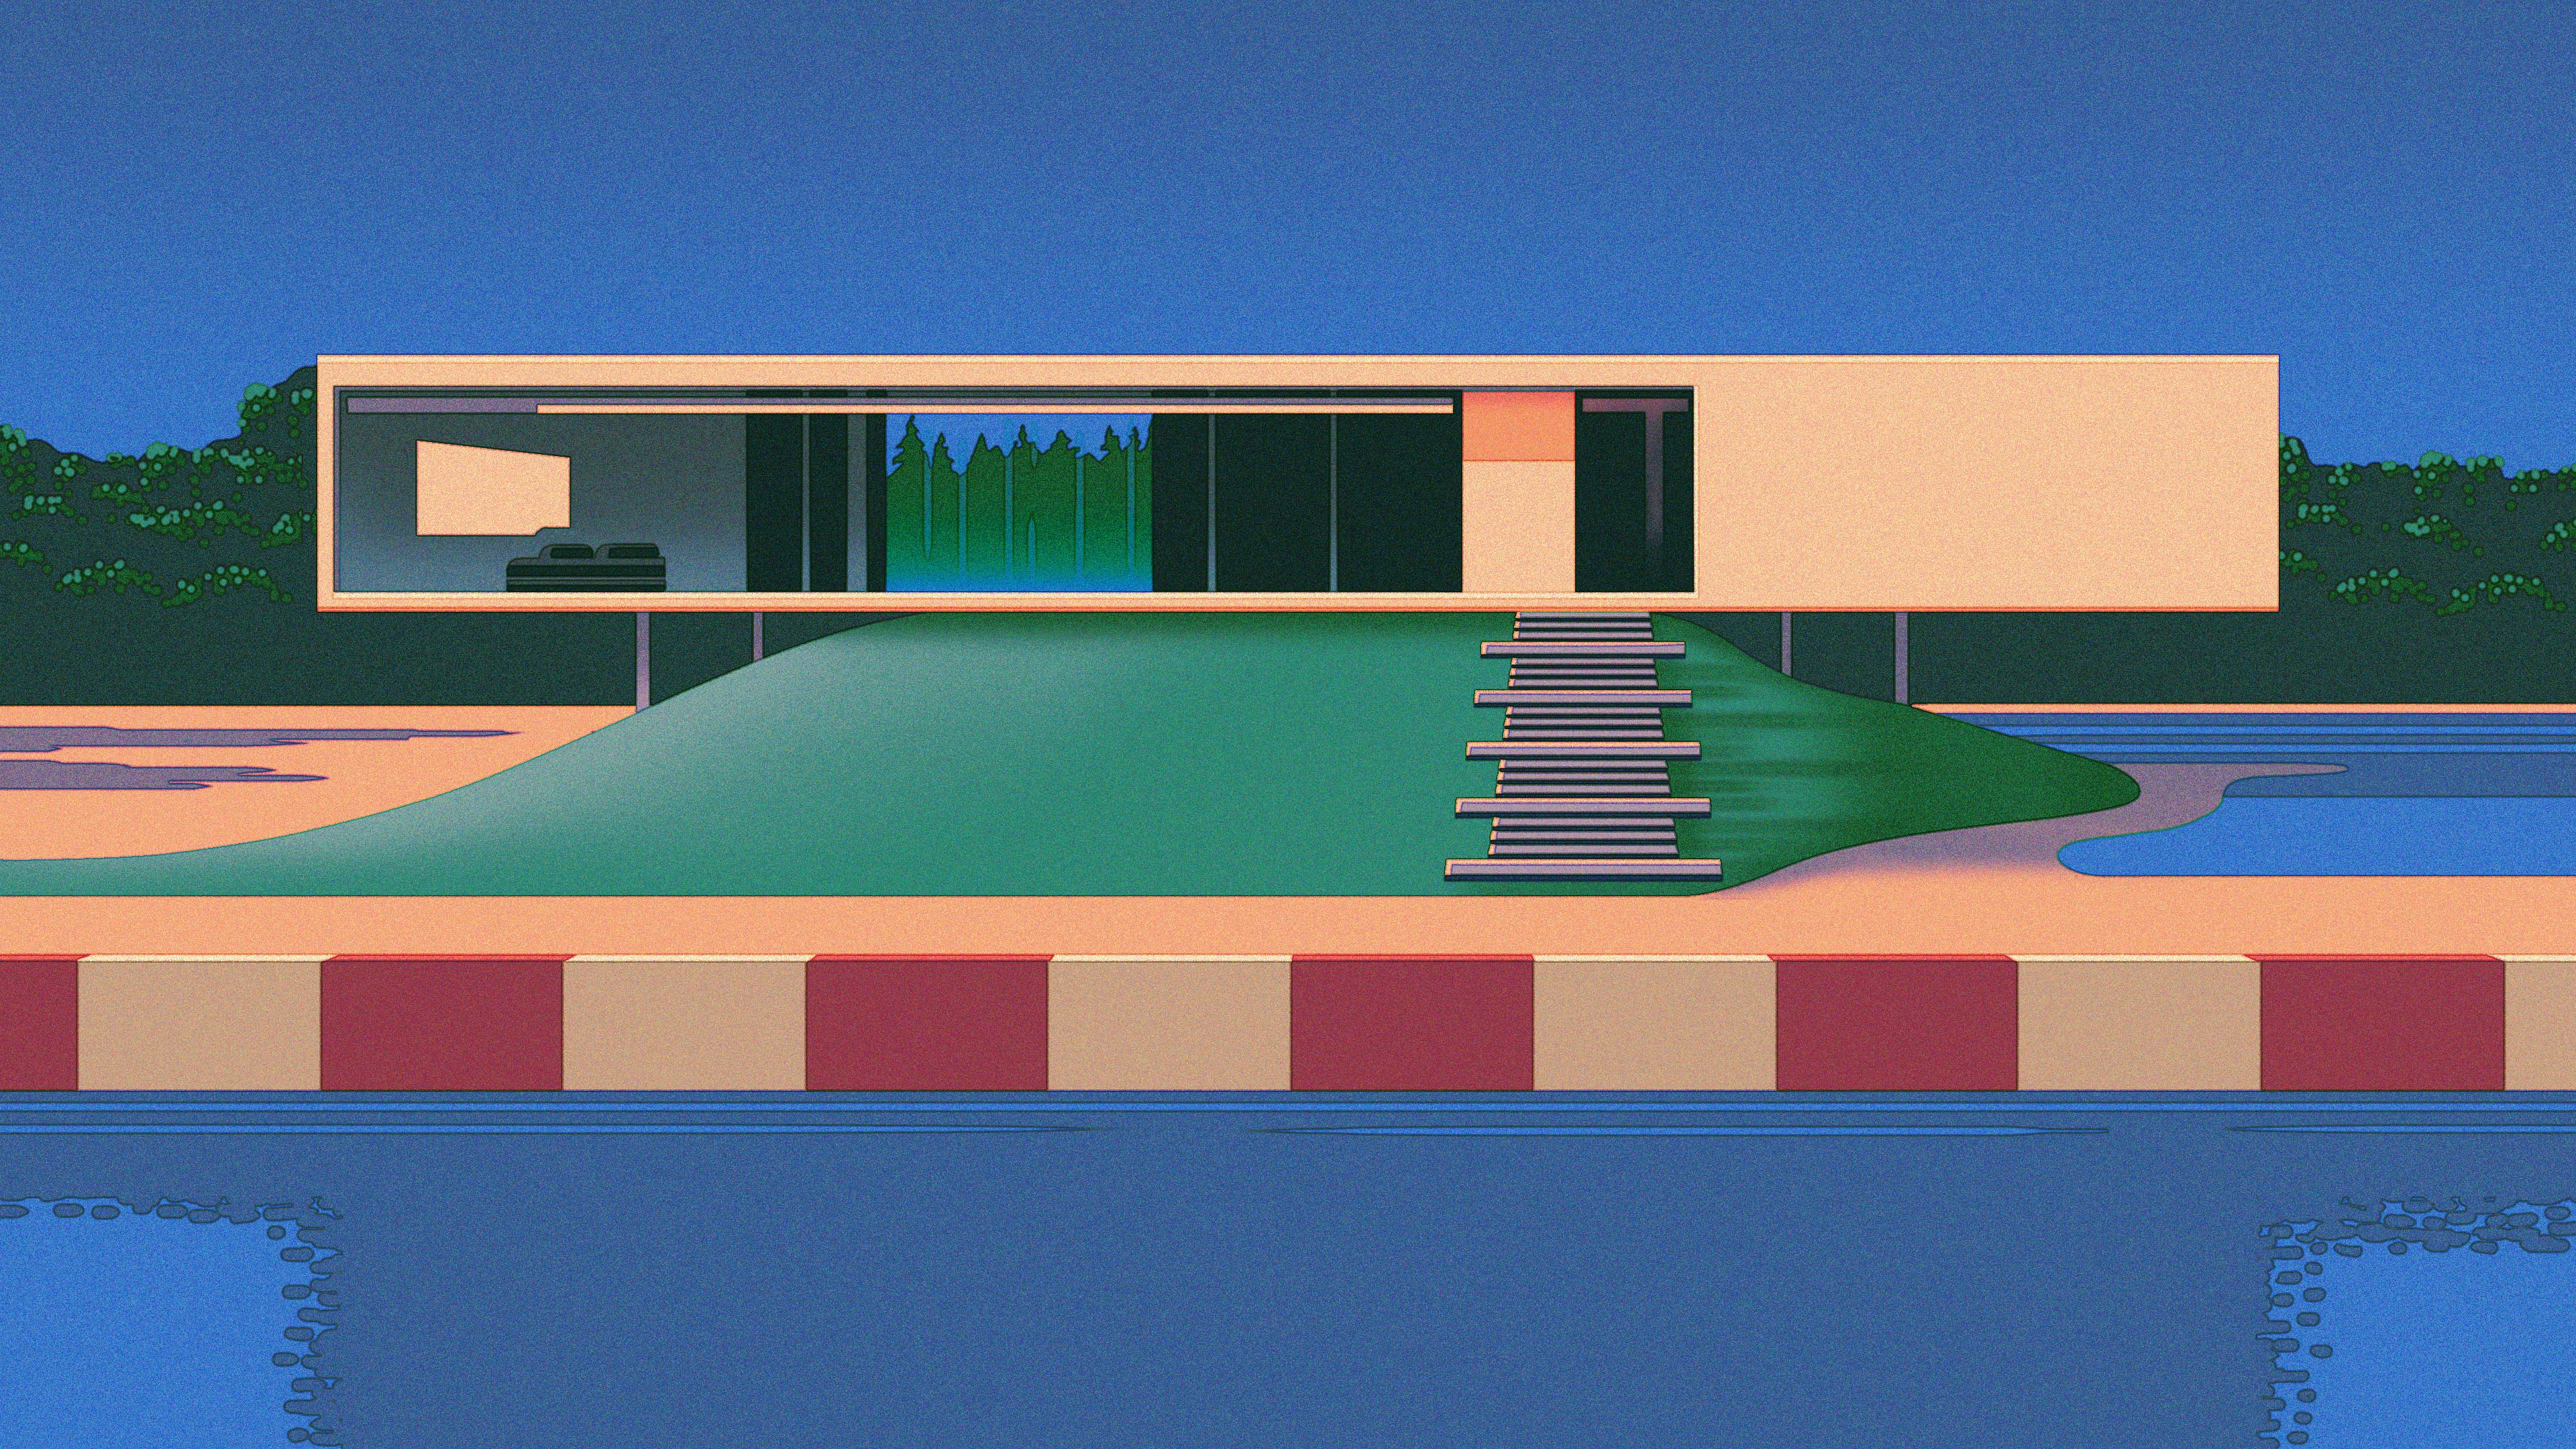 Illustration of a house with flood defences